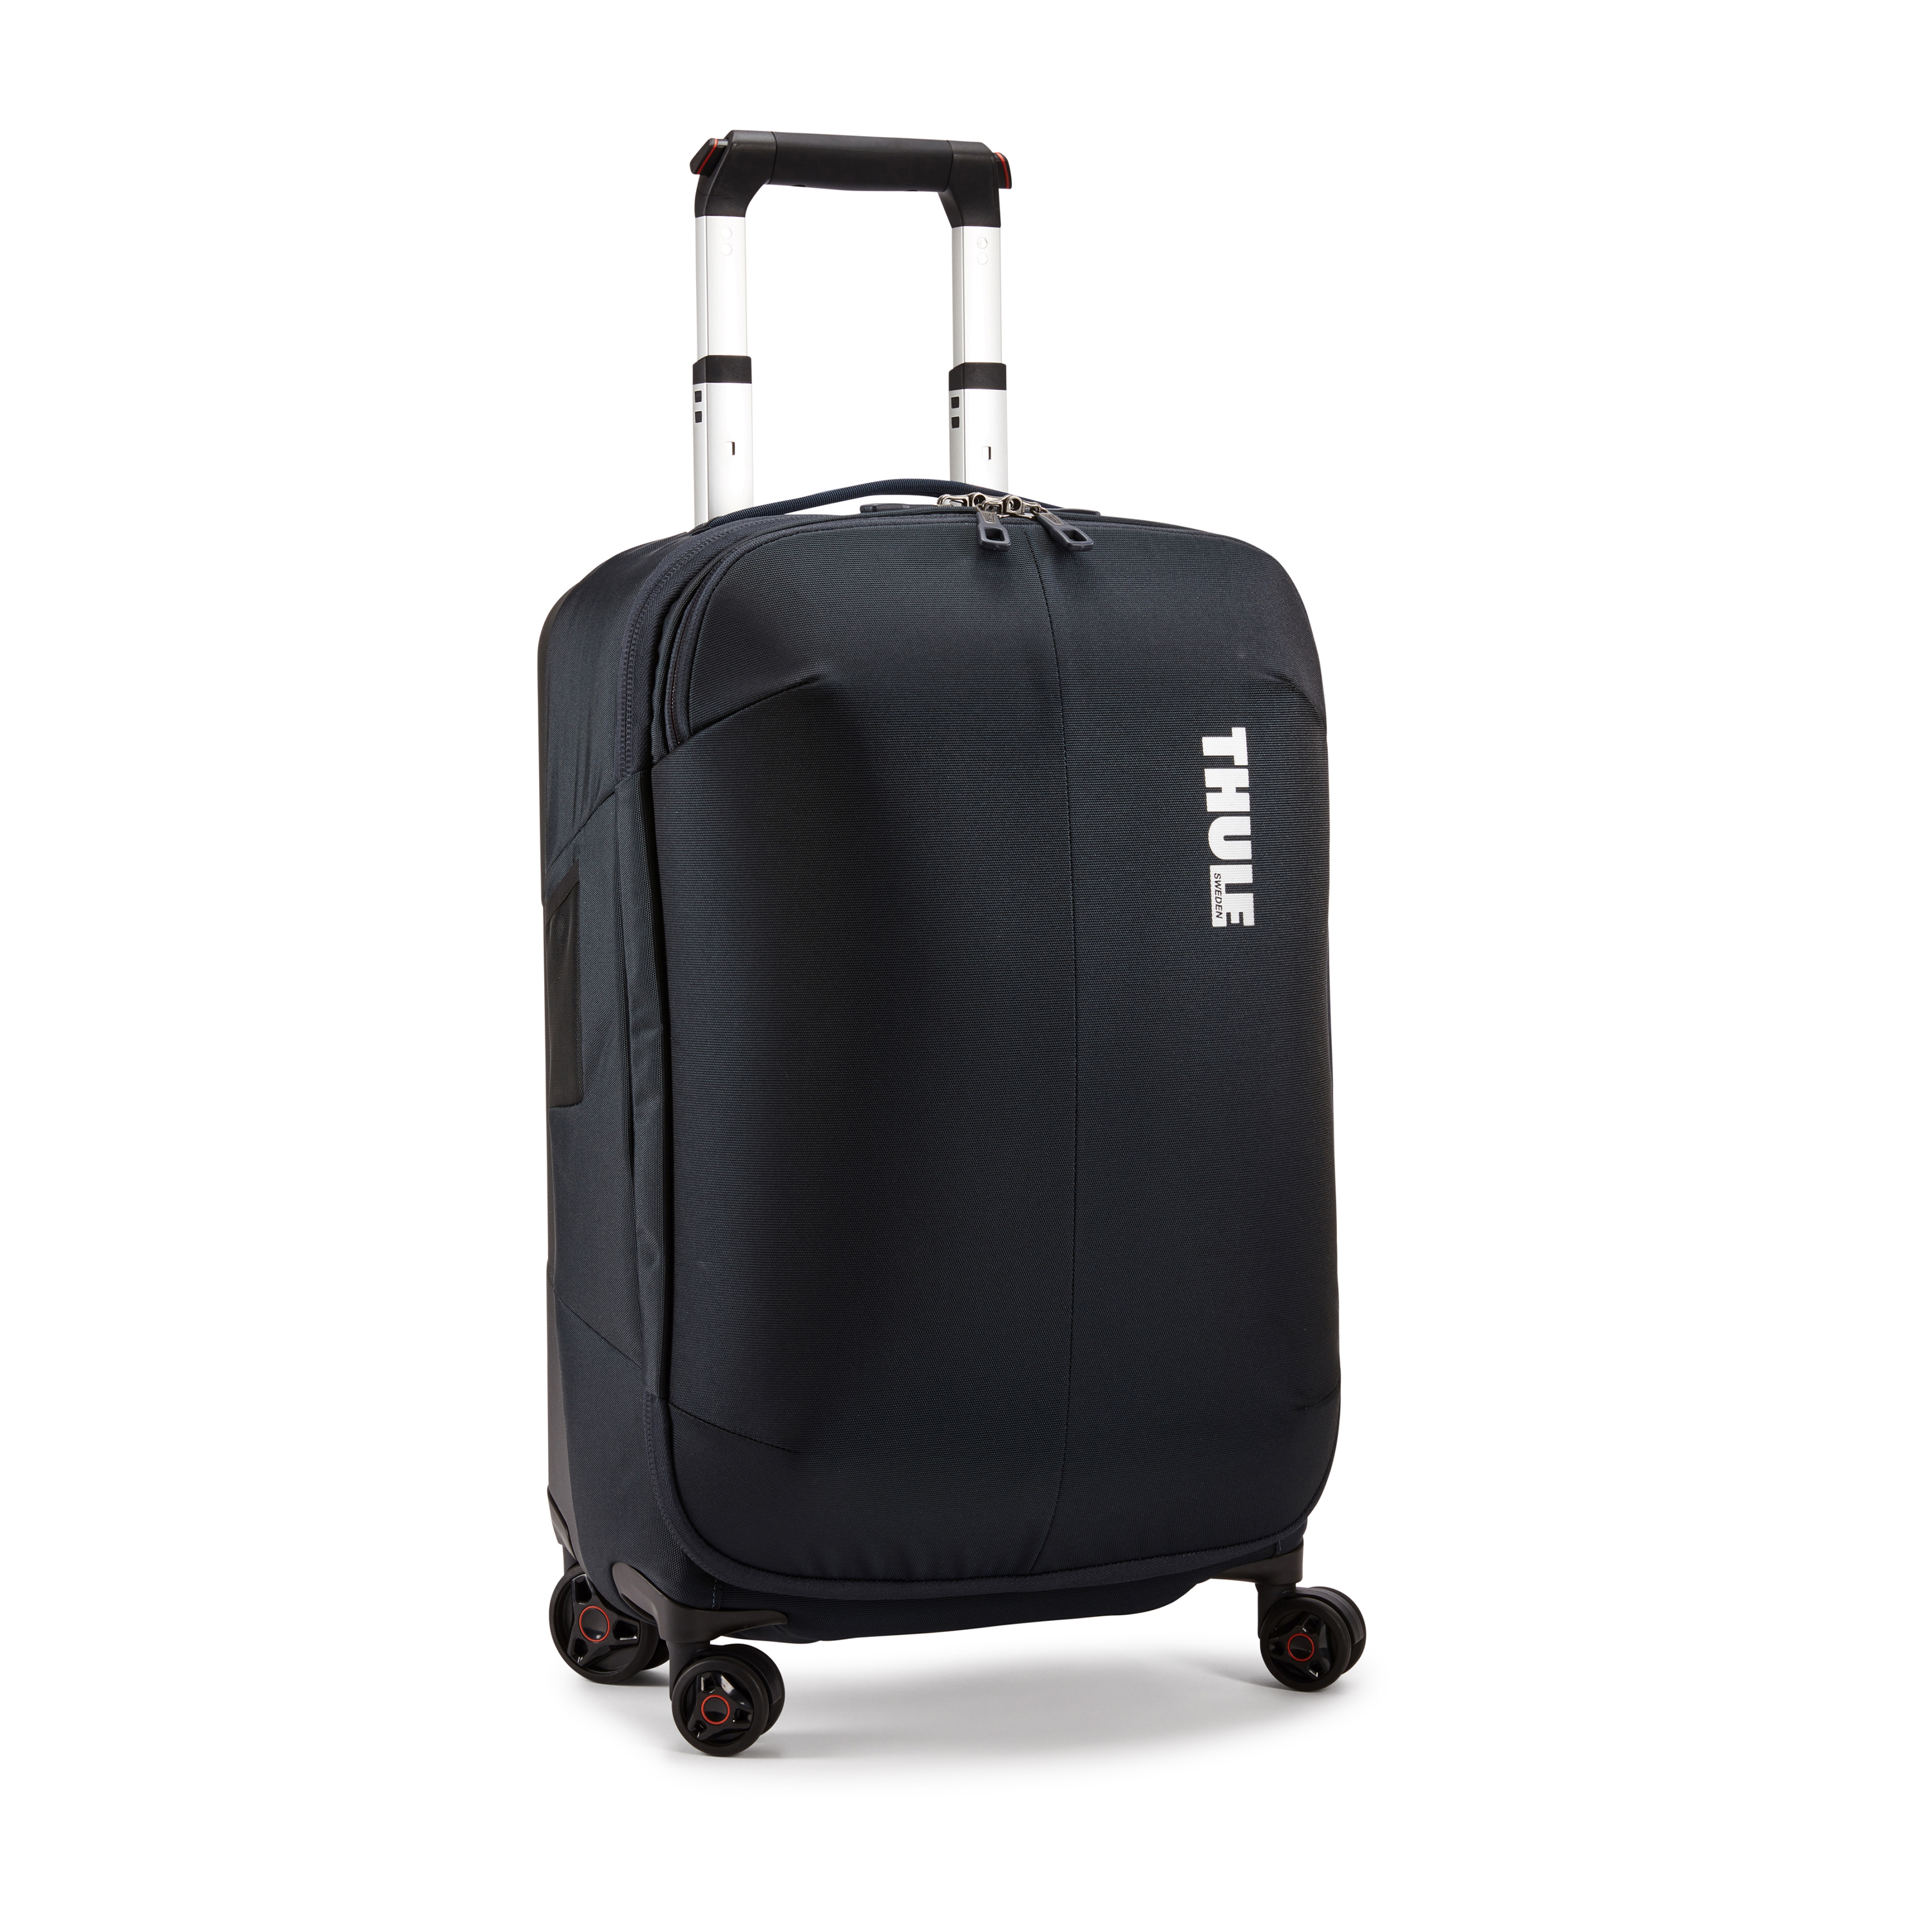 Thule Subterra Carry On Spinner Suitcase 33L